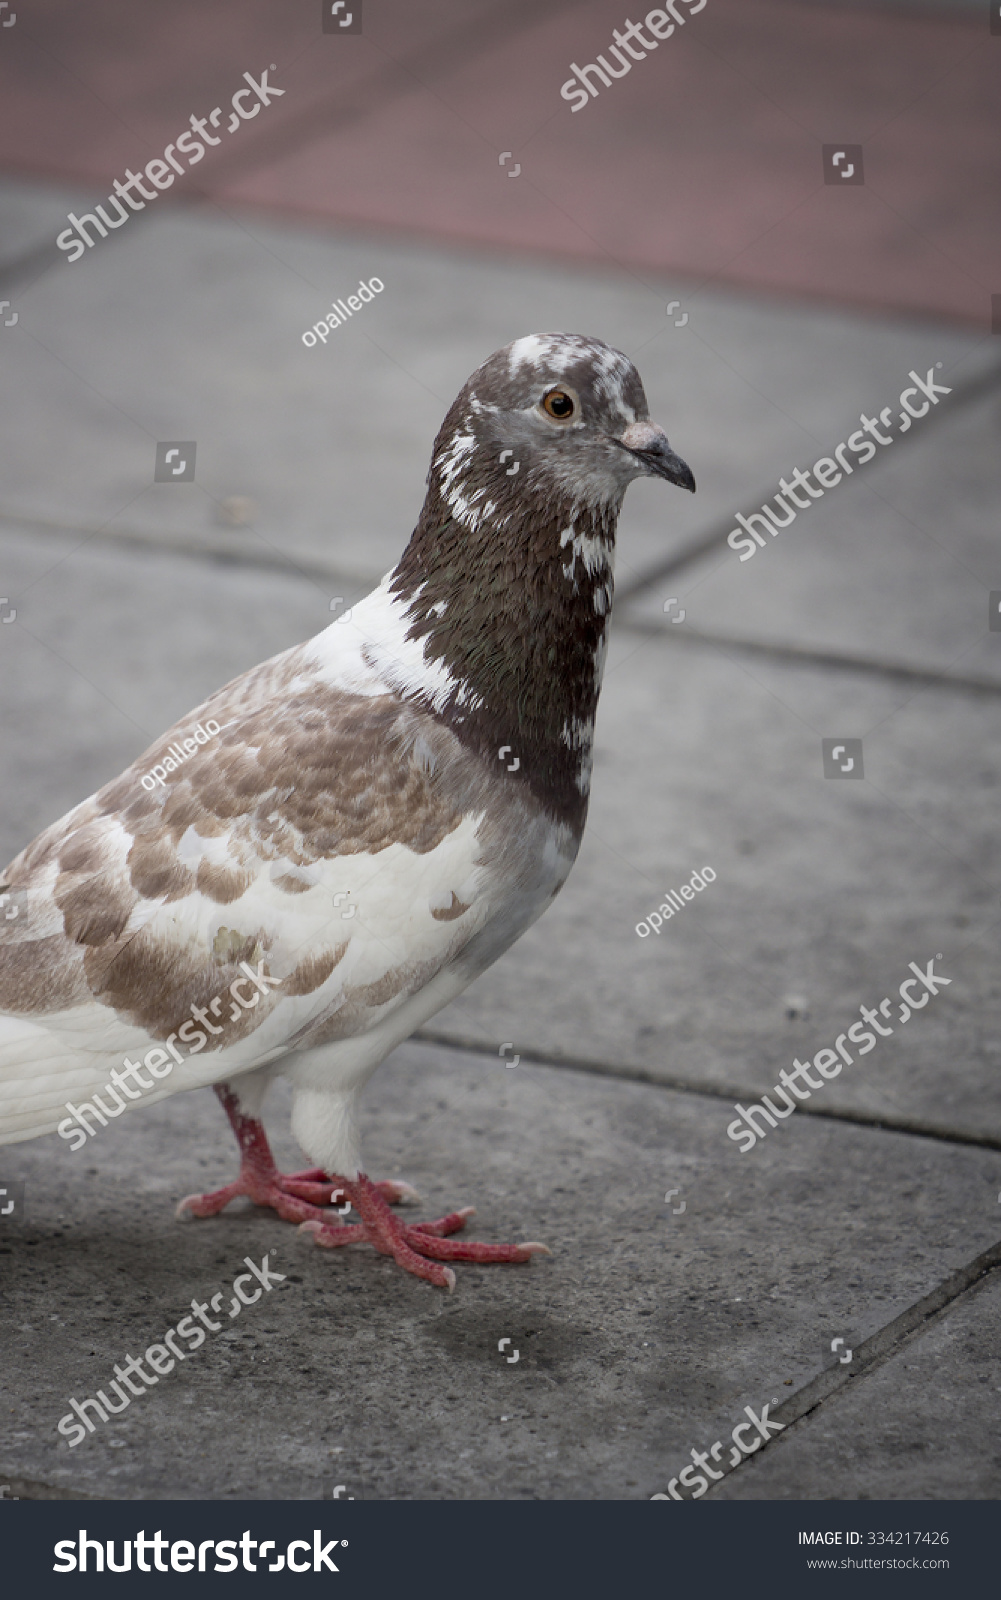 Portrait of a brown pigeon #334217426